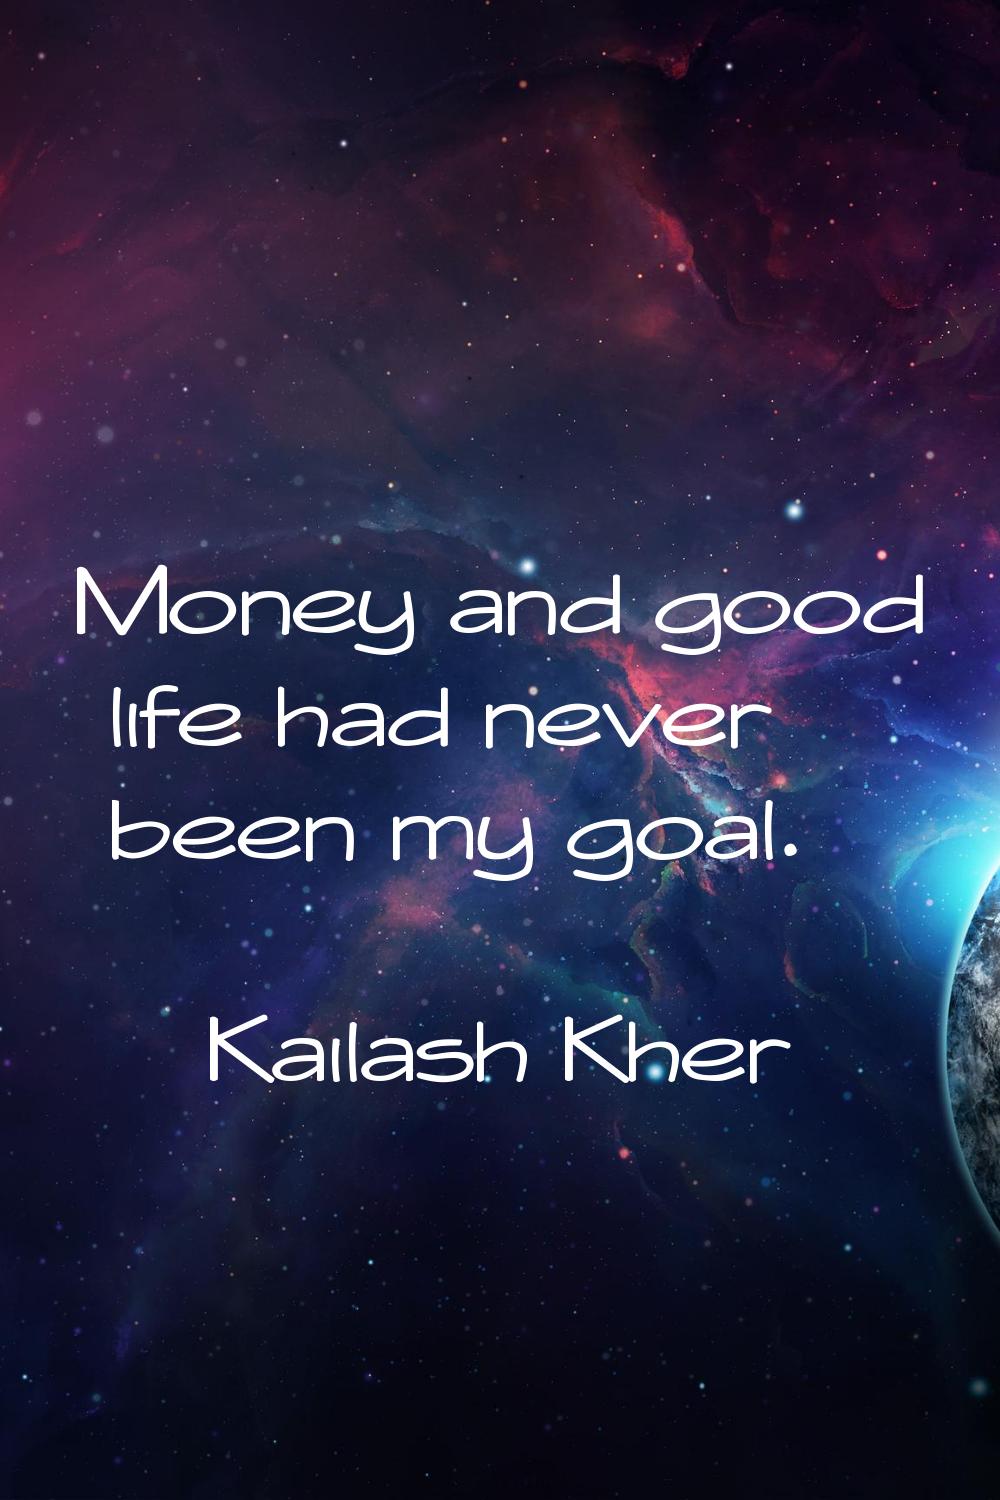 Money and good life had never been my goal.